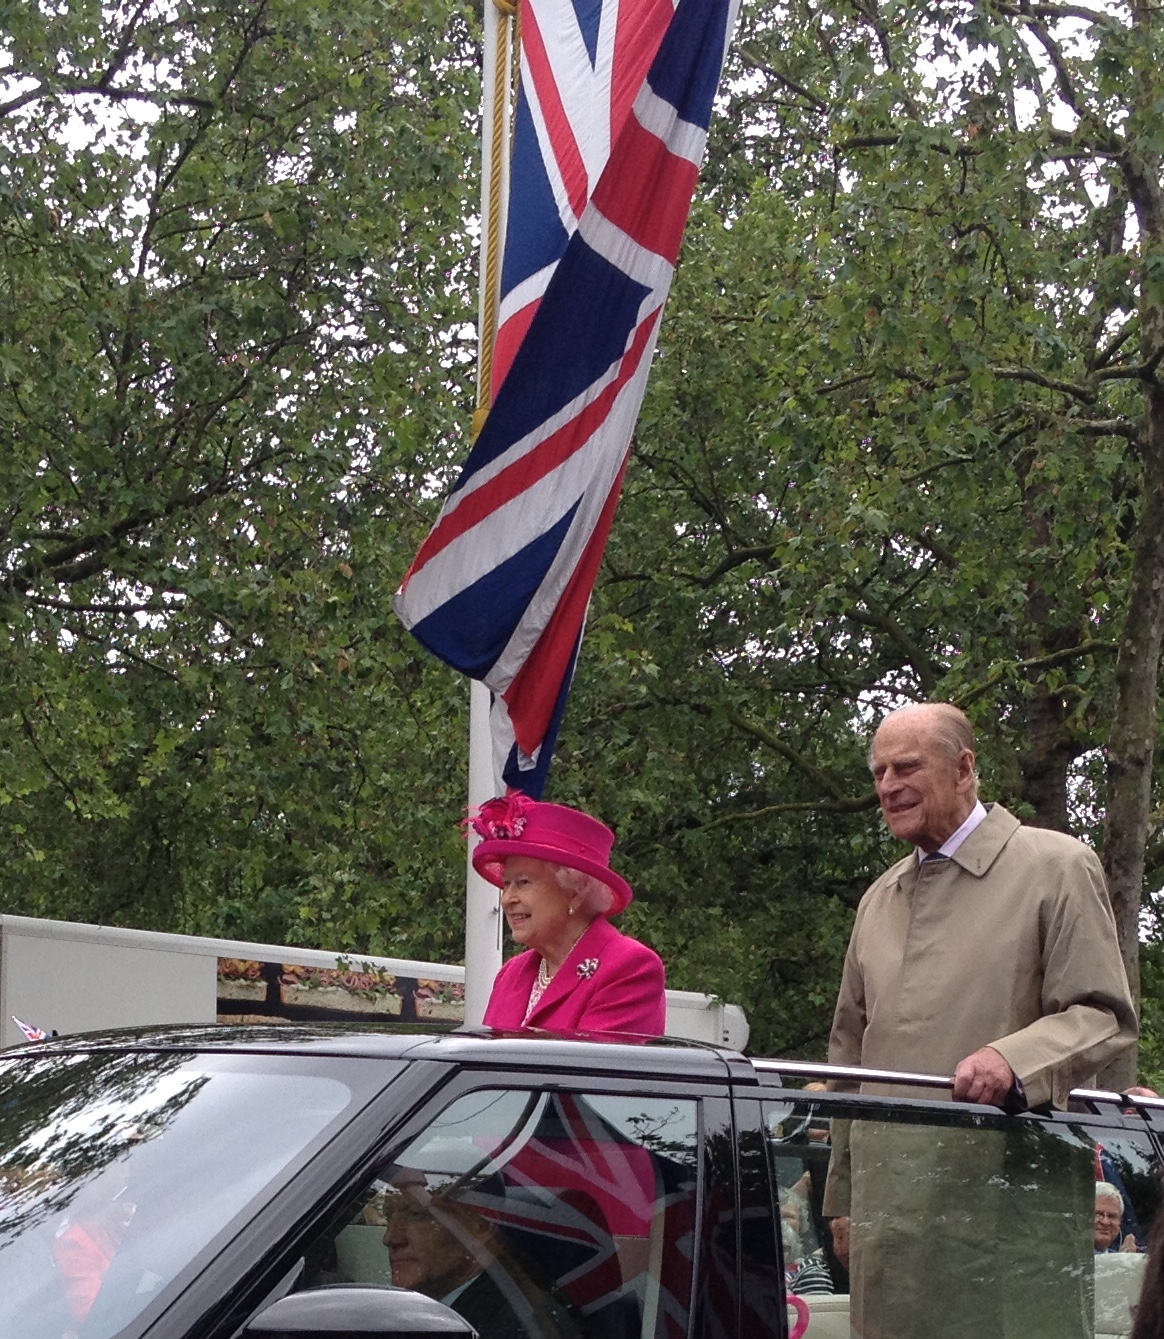 HRH Prince Philip stands alongside the Queen as they travel along the Mall in an open top car. The Queen is wearing a bright pink hat and coat. The Prince is wearing a long, beige mack.